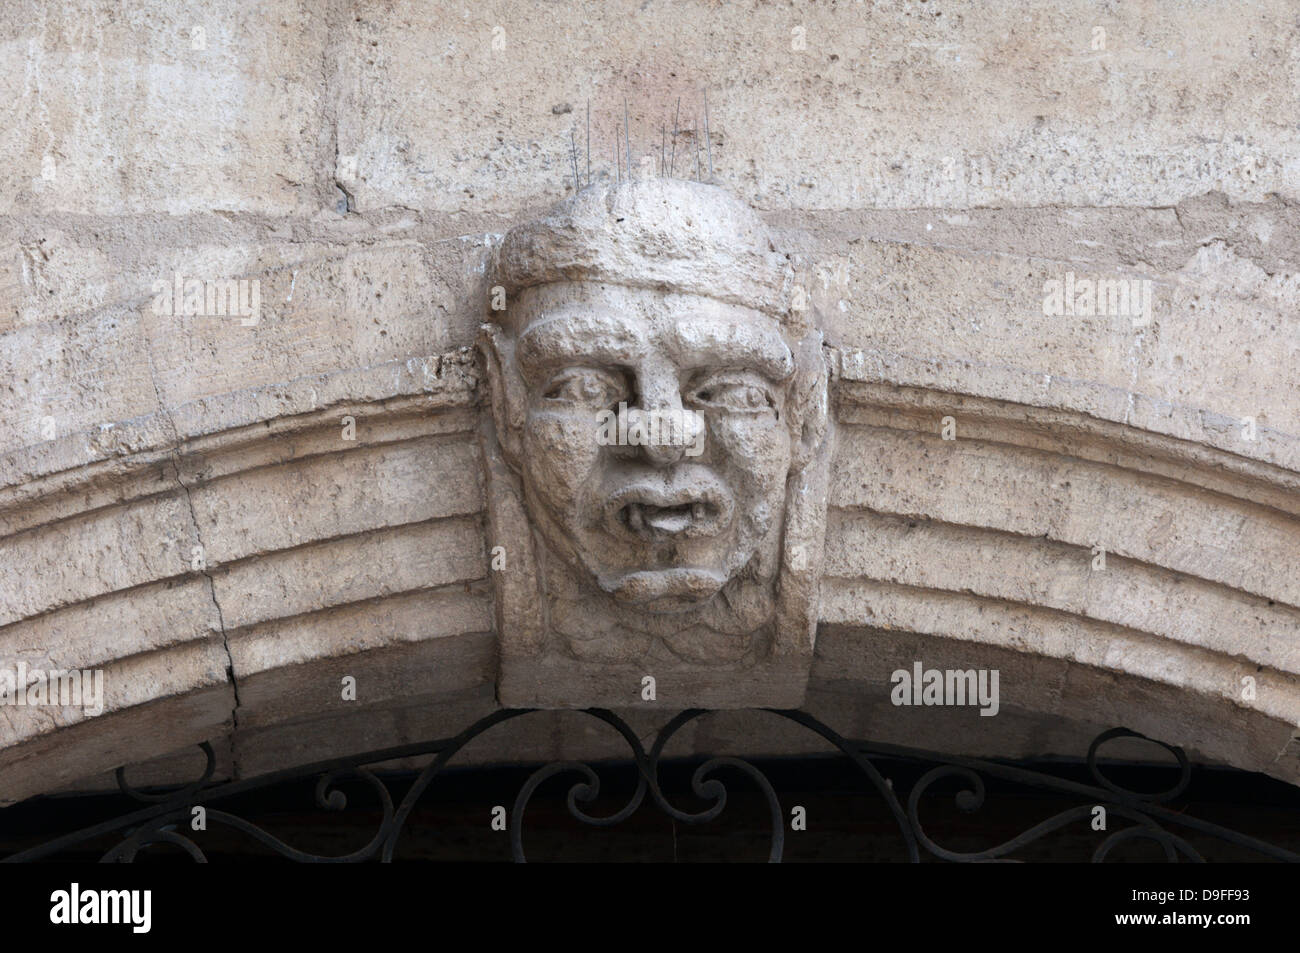 An ugly grotesque head carved over a doorway in the old French town of Pezenas. Stock Photo